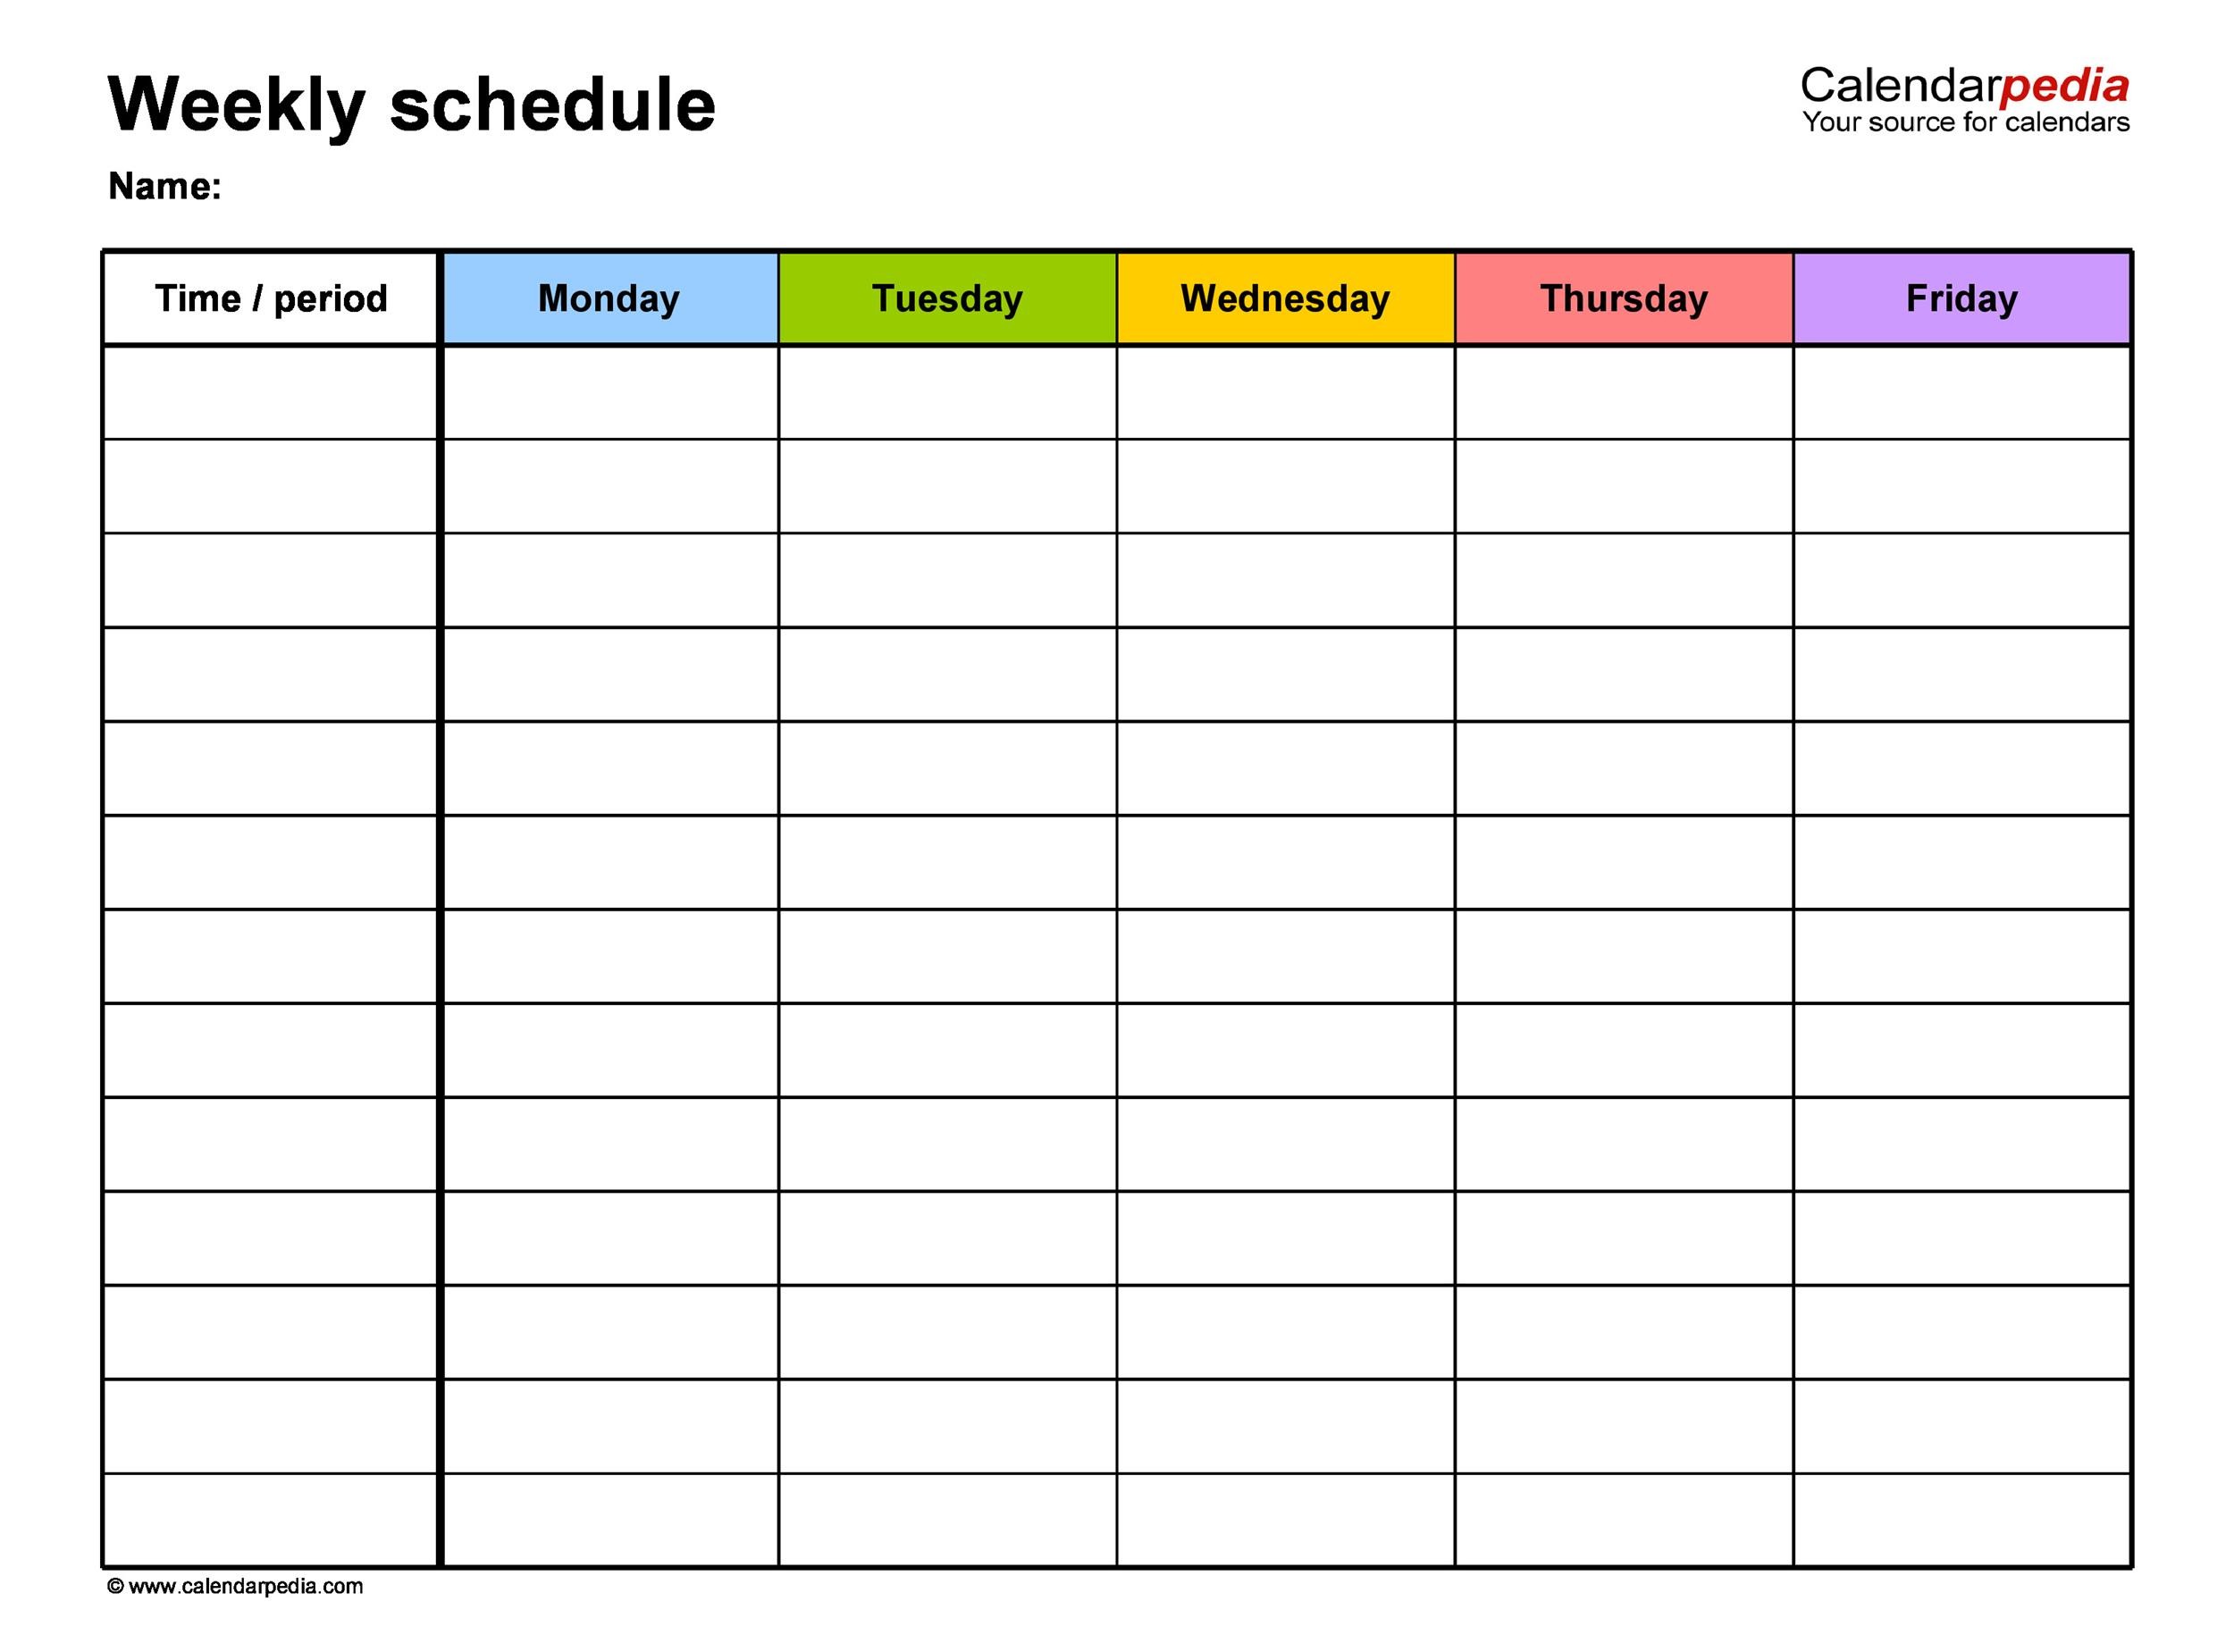 17 Perfect Daily Work Schedule Templates TemplateLab